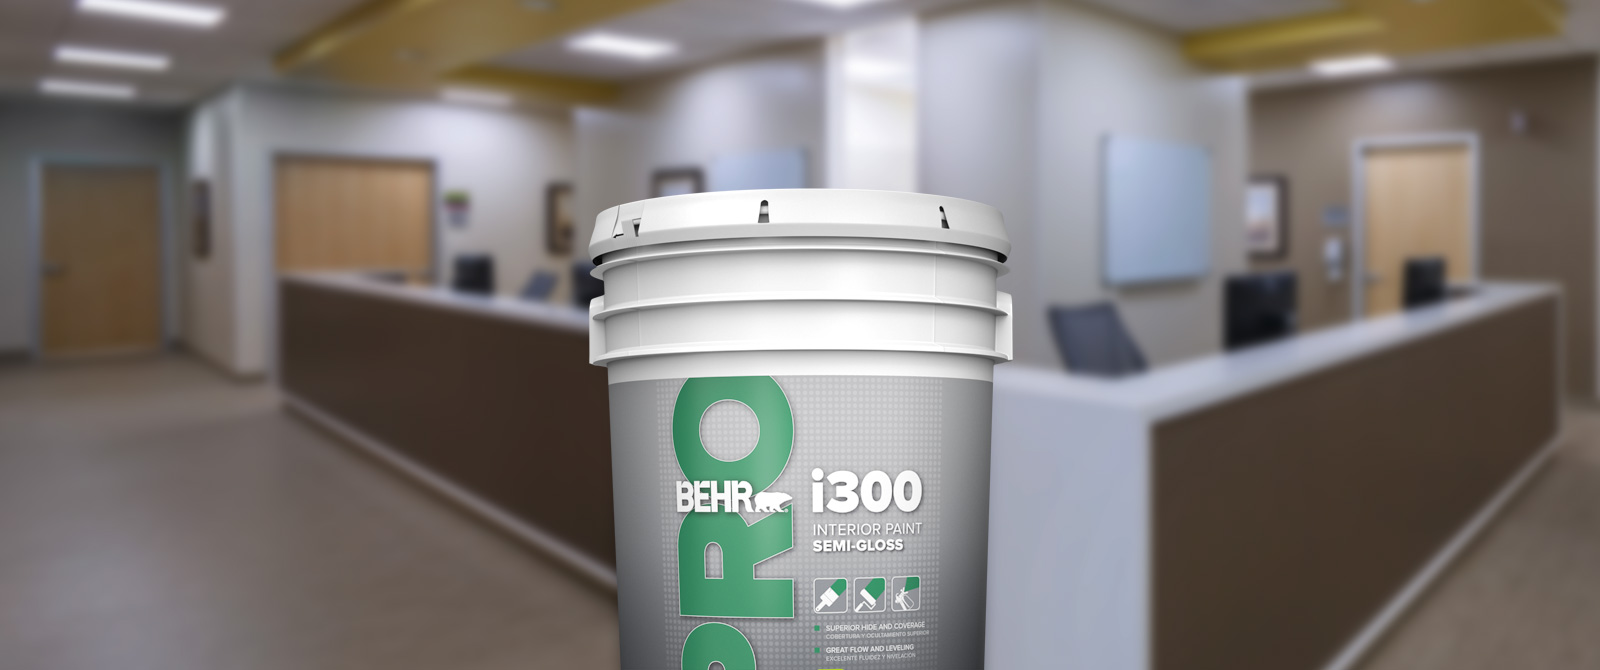 BehrPro interior i300 products landing page desktop image featuring 5 gallon i300 can.